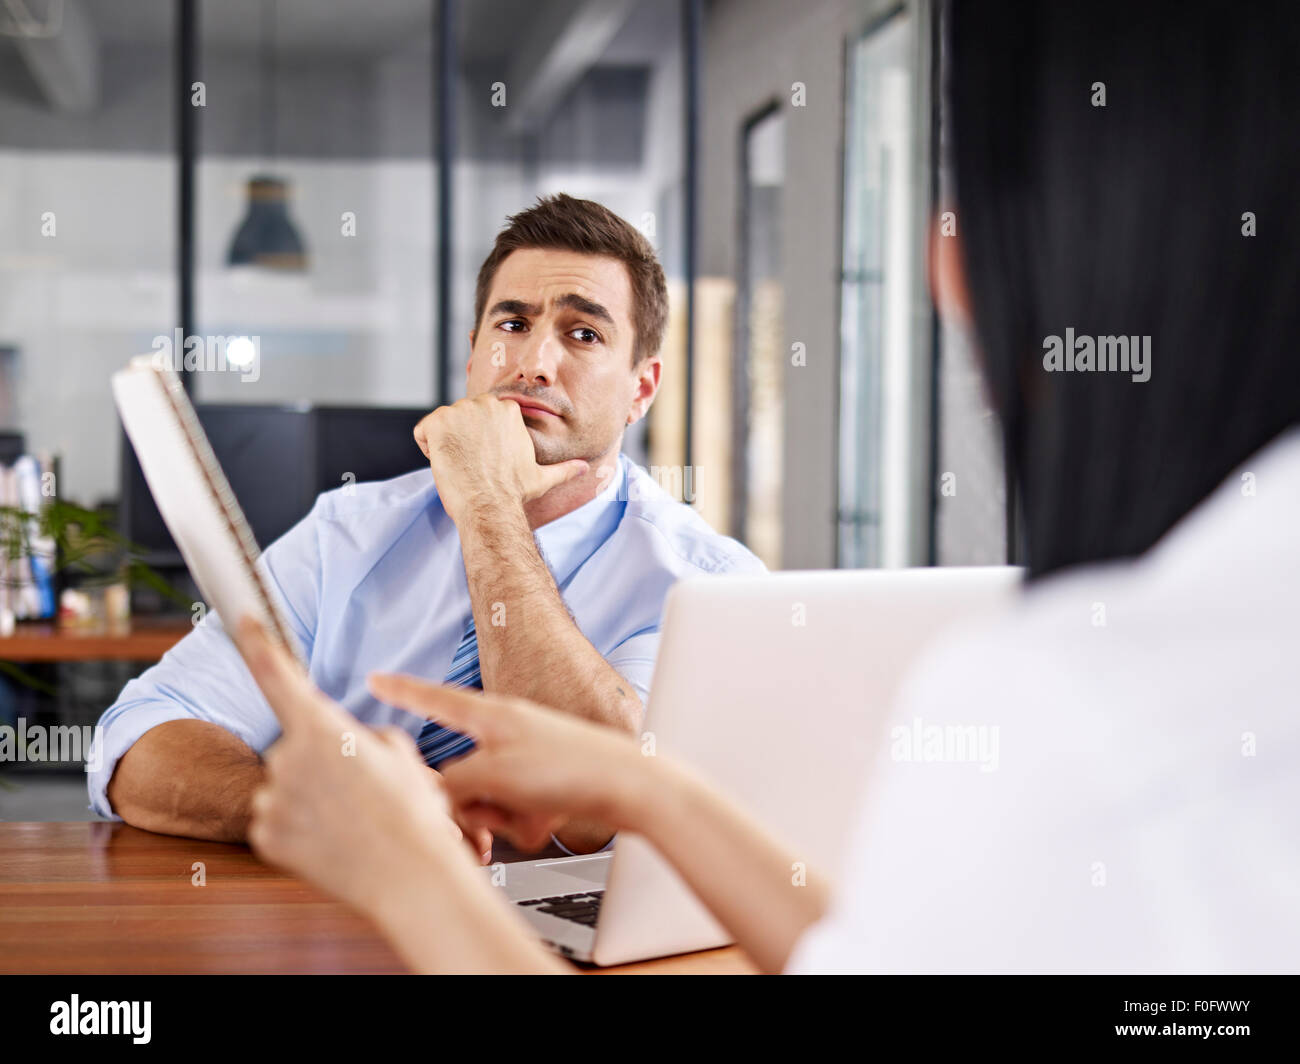 skeptical interviewer looking at interviewee Stock Photo